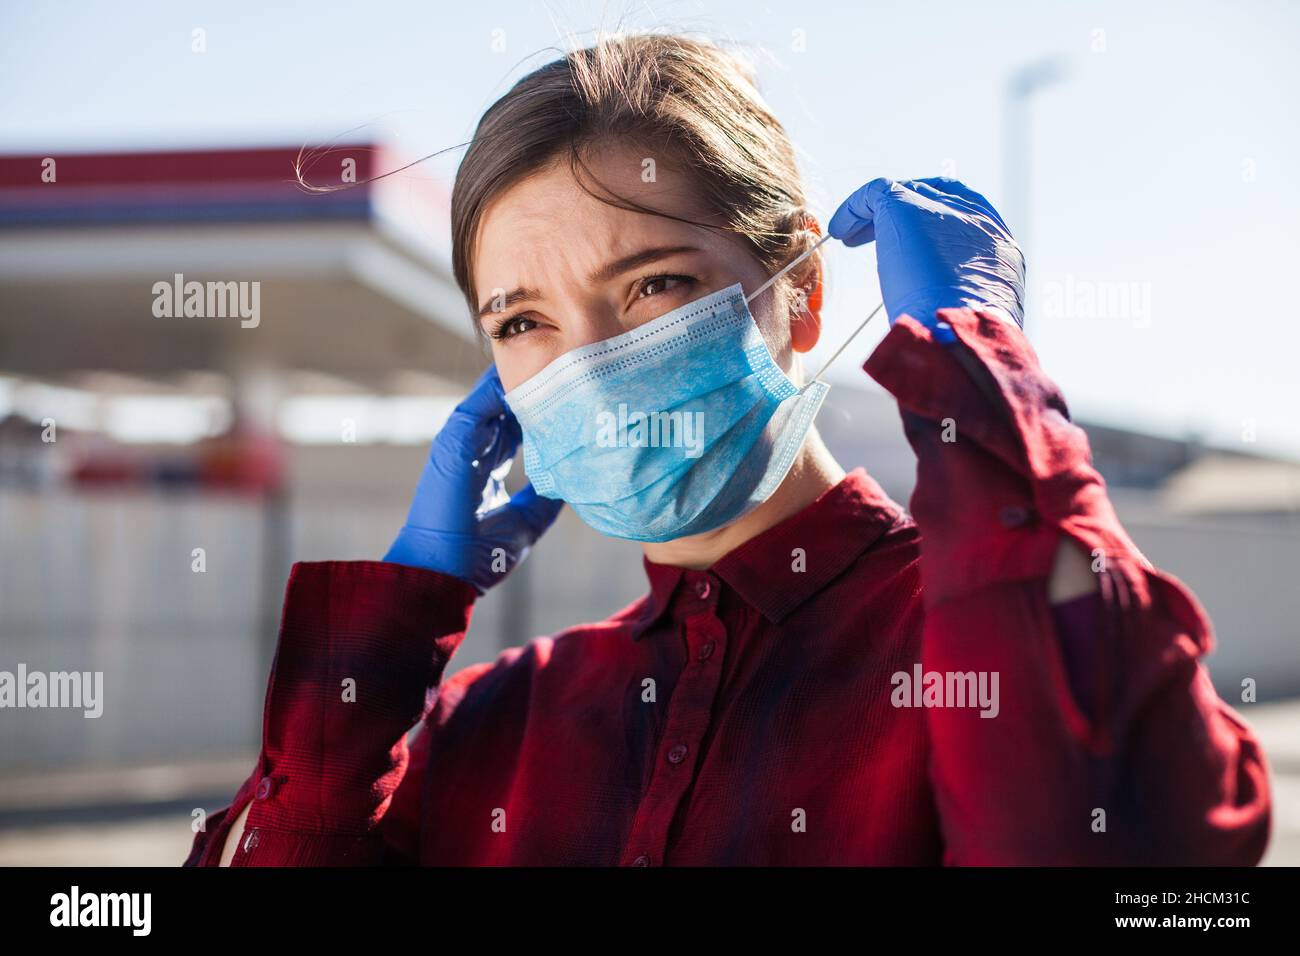 Young pretty caucasian woman putting protective face mask on,worried concerned expression,Coronavirus pandemic crisis prevention protection measures Stock Photo